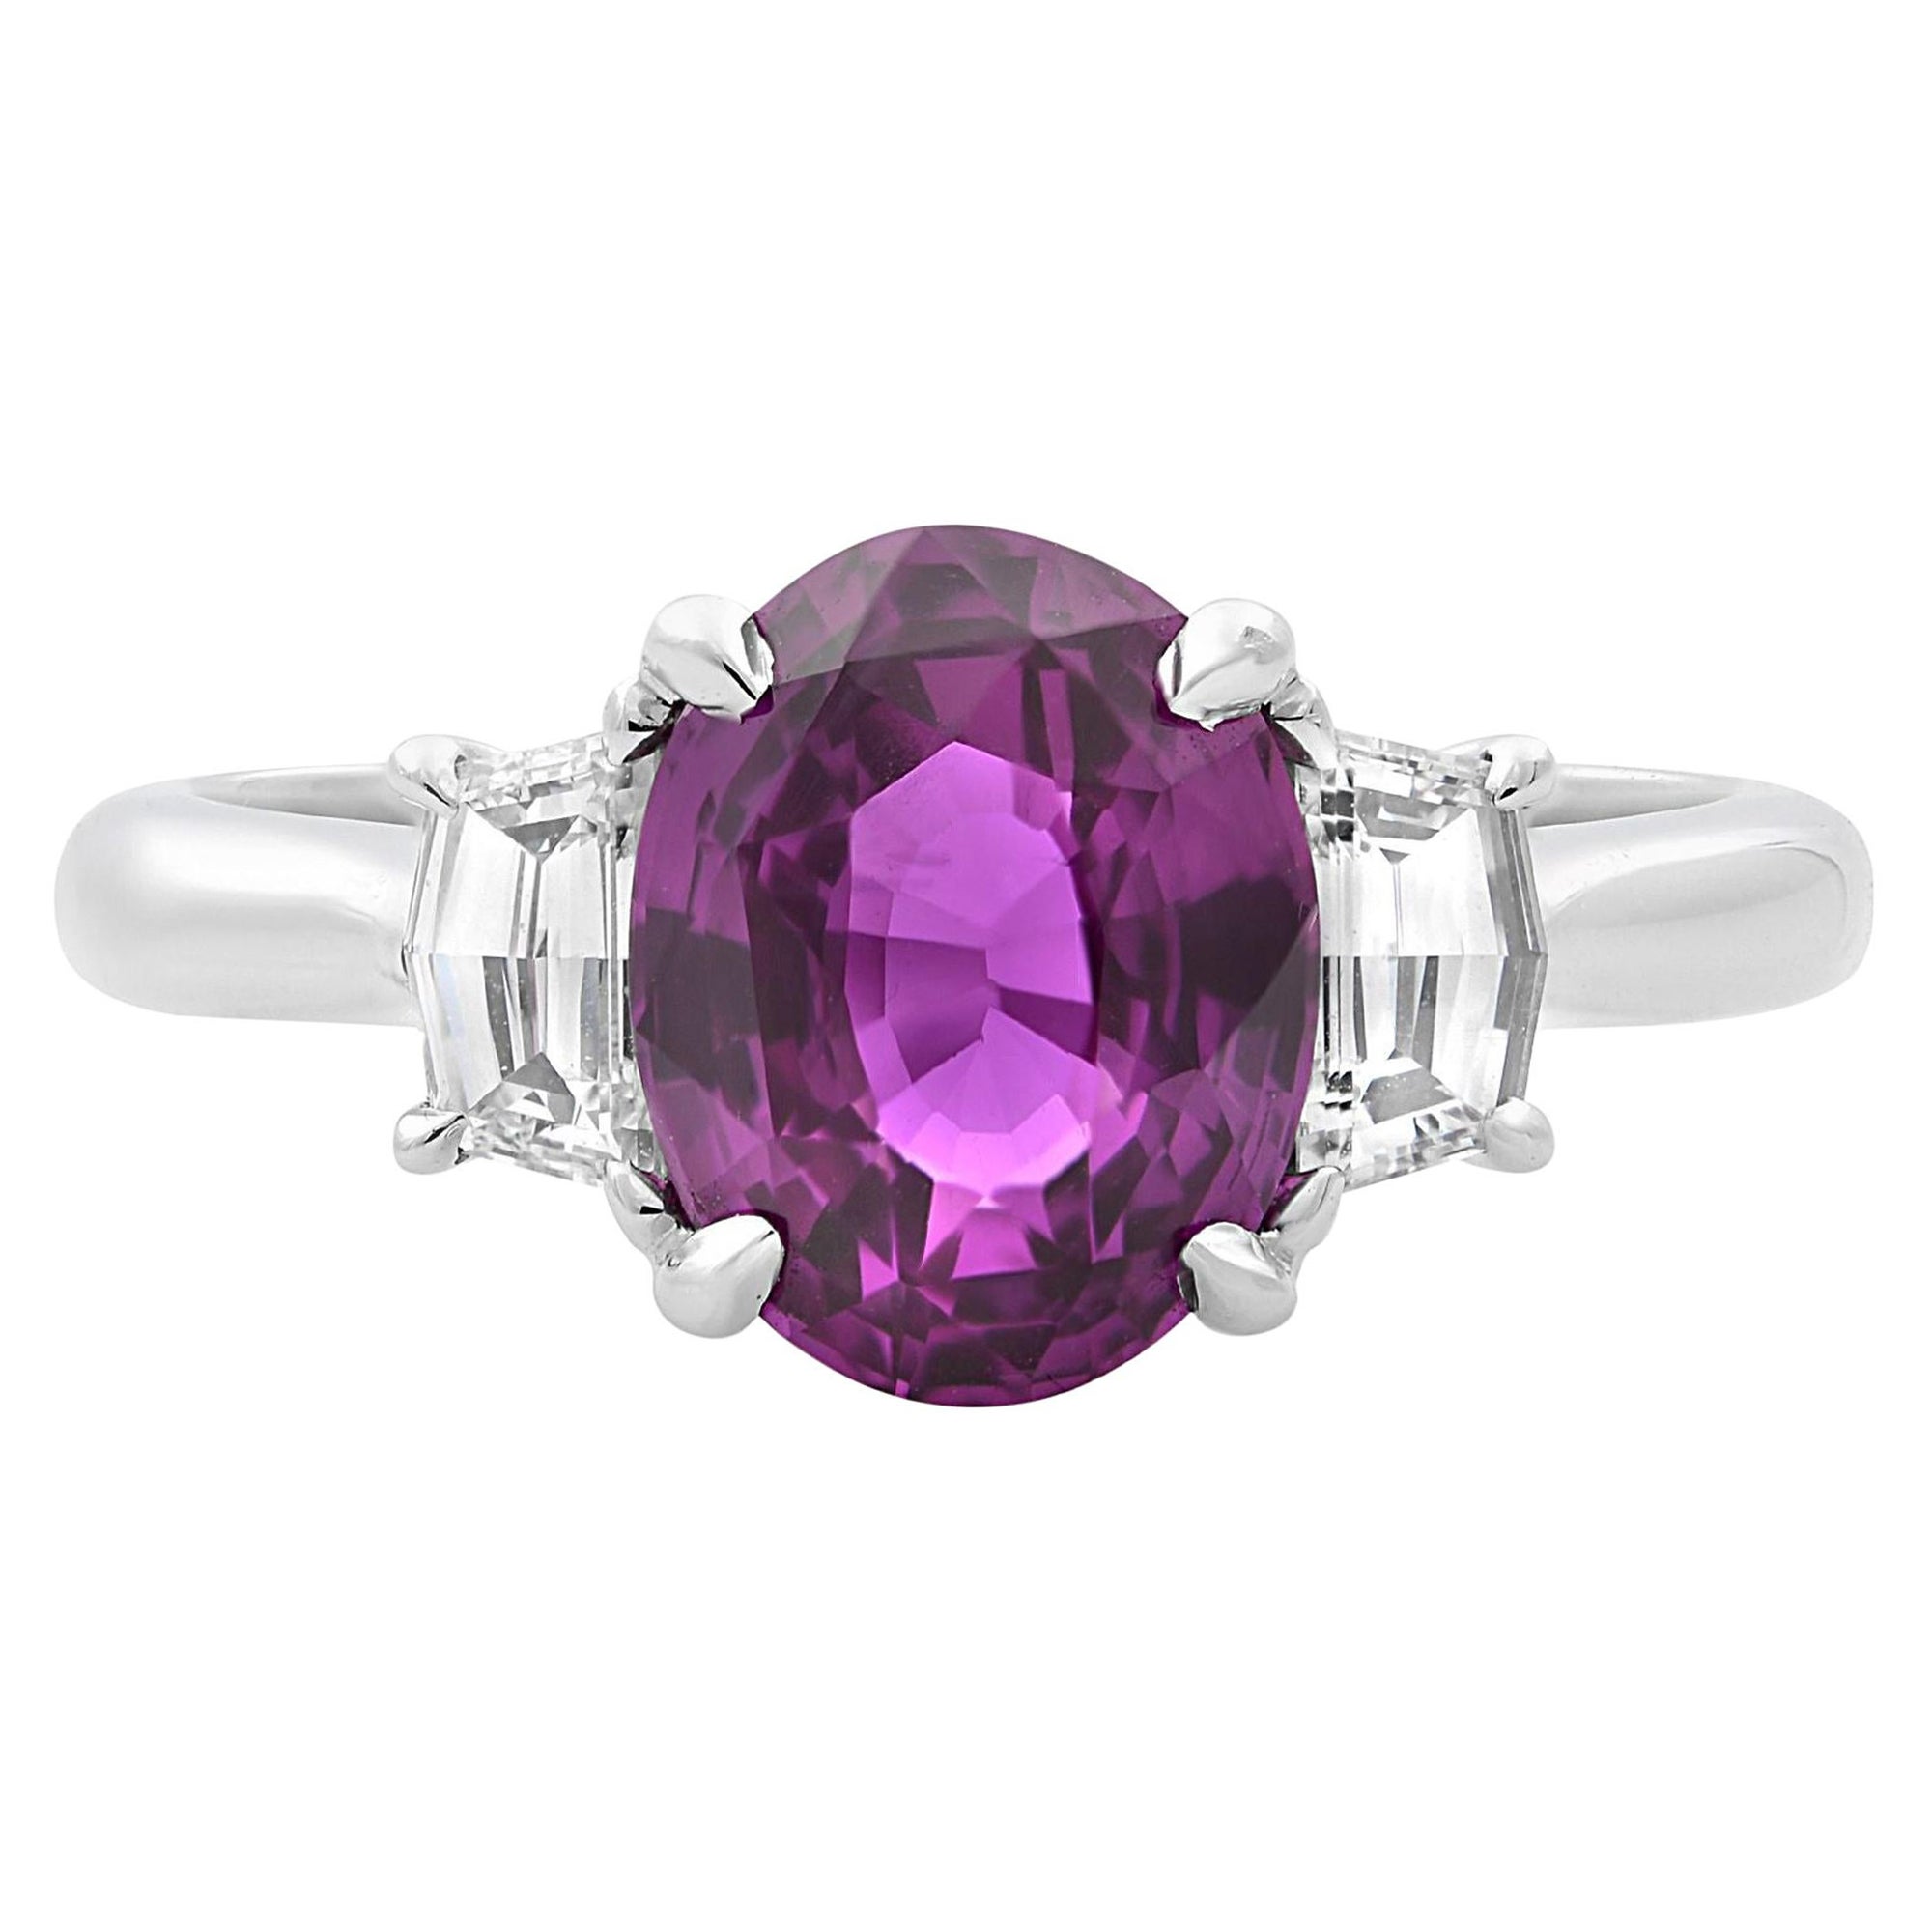 2.61cts Oval Pink Sapphire & Diamond Three Stone Engagement Ring 18K White Gold For Sale